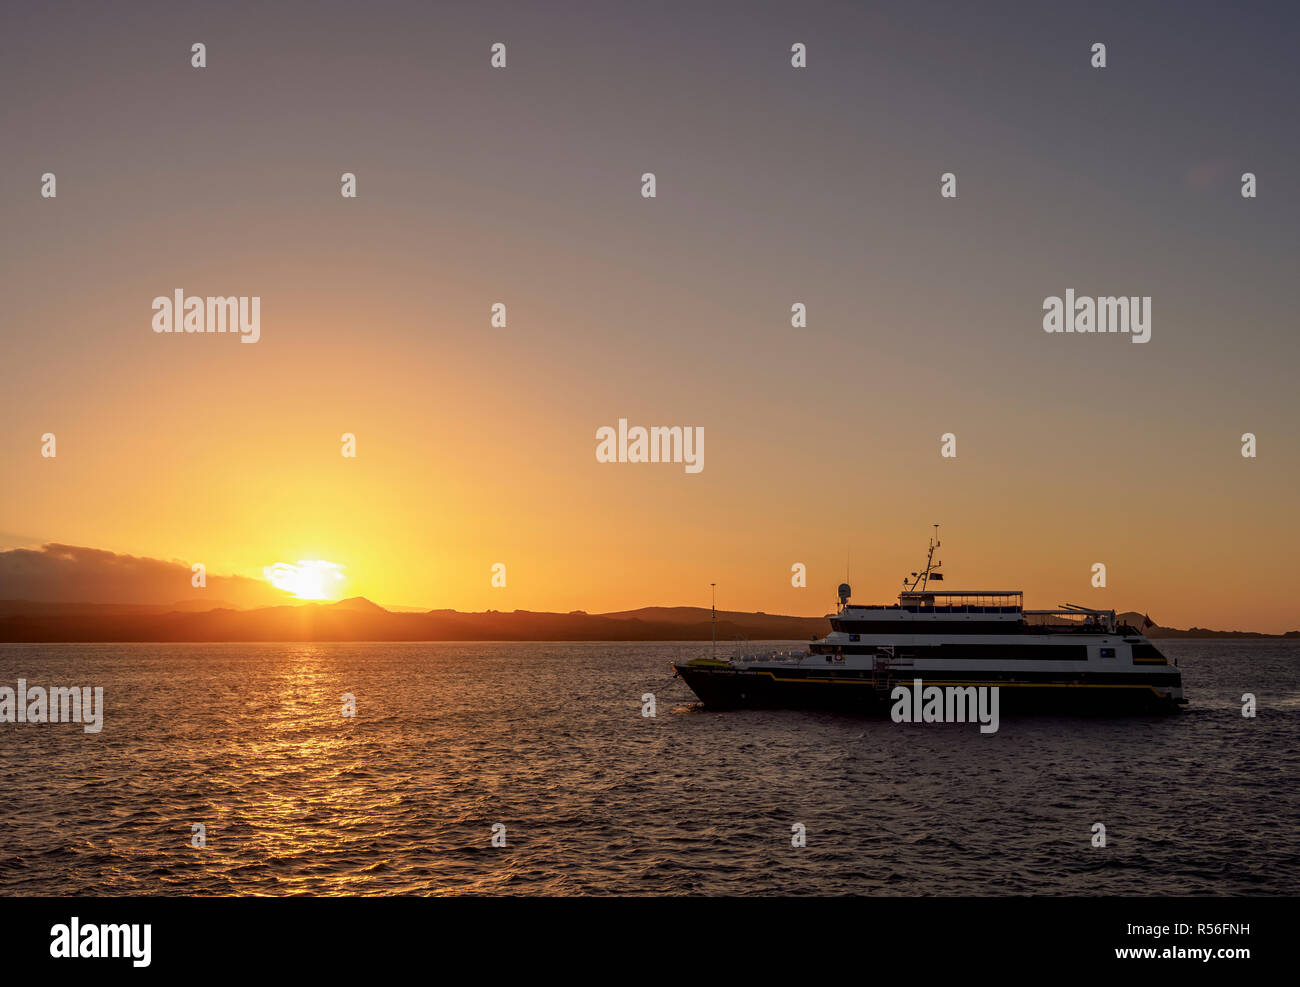 National Geographic Islander Cruise Ship at sunset, Santiago or James Island in the background, Galapagos, Ecuador Stock Photo